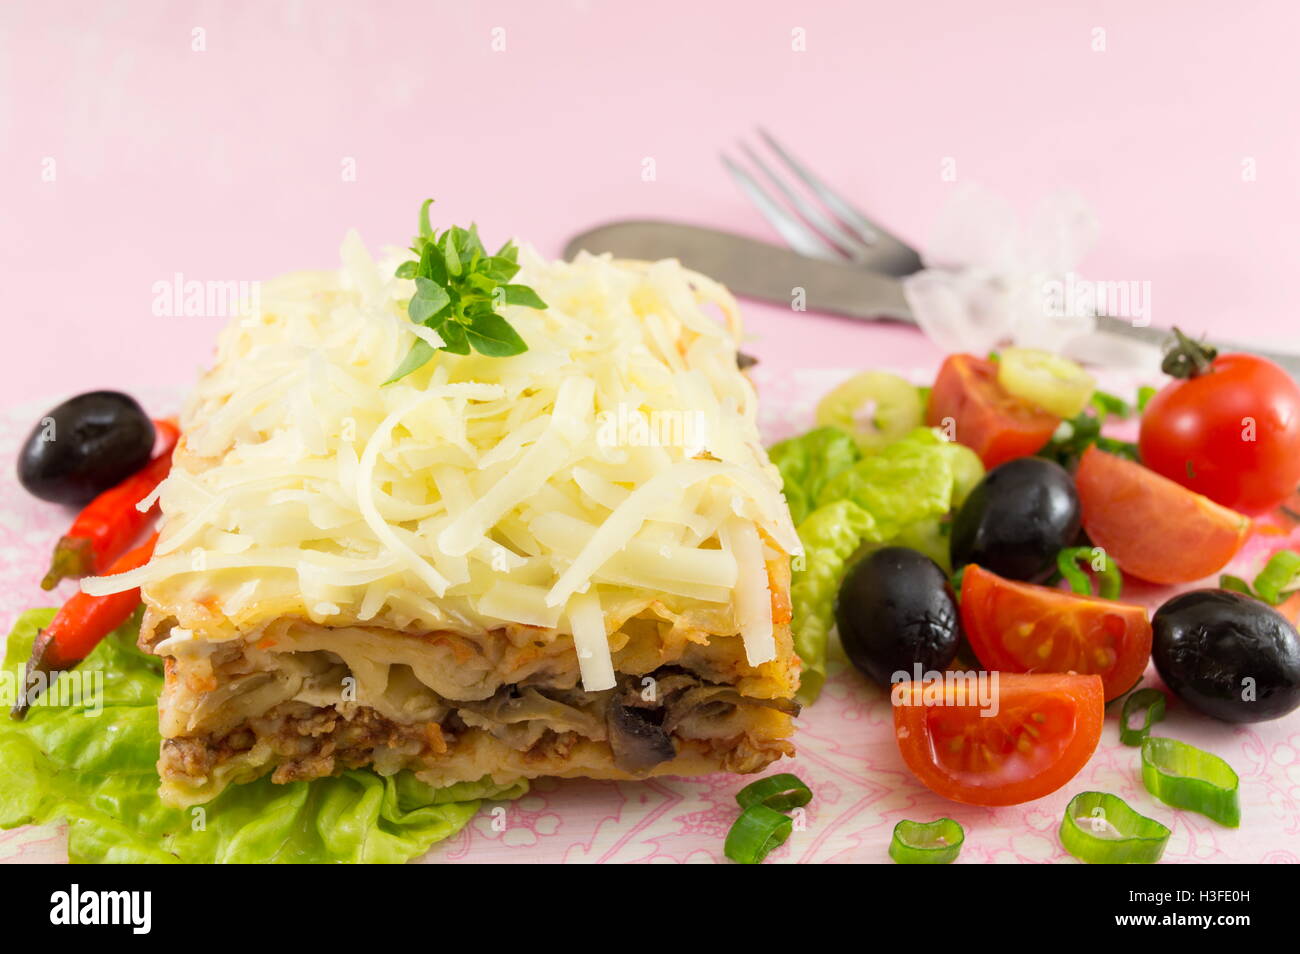 Lasagna portion served with fresh vegetables on a plate Stock Photo